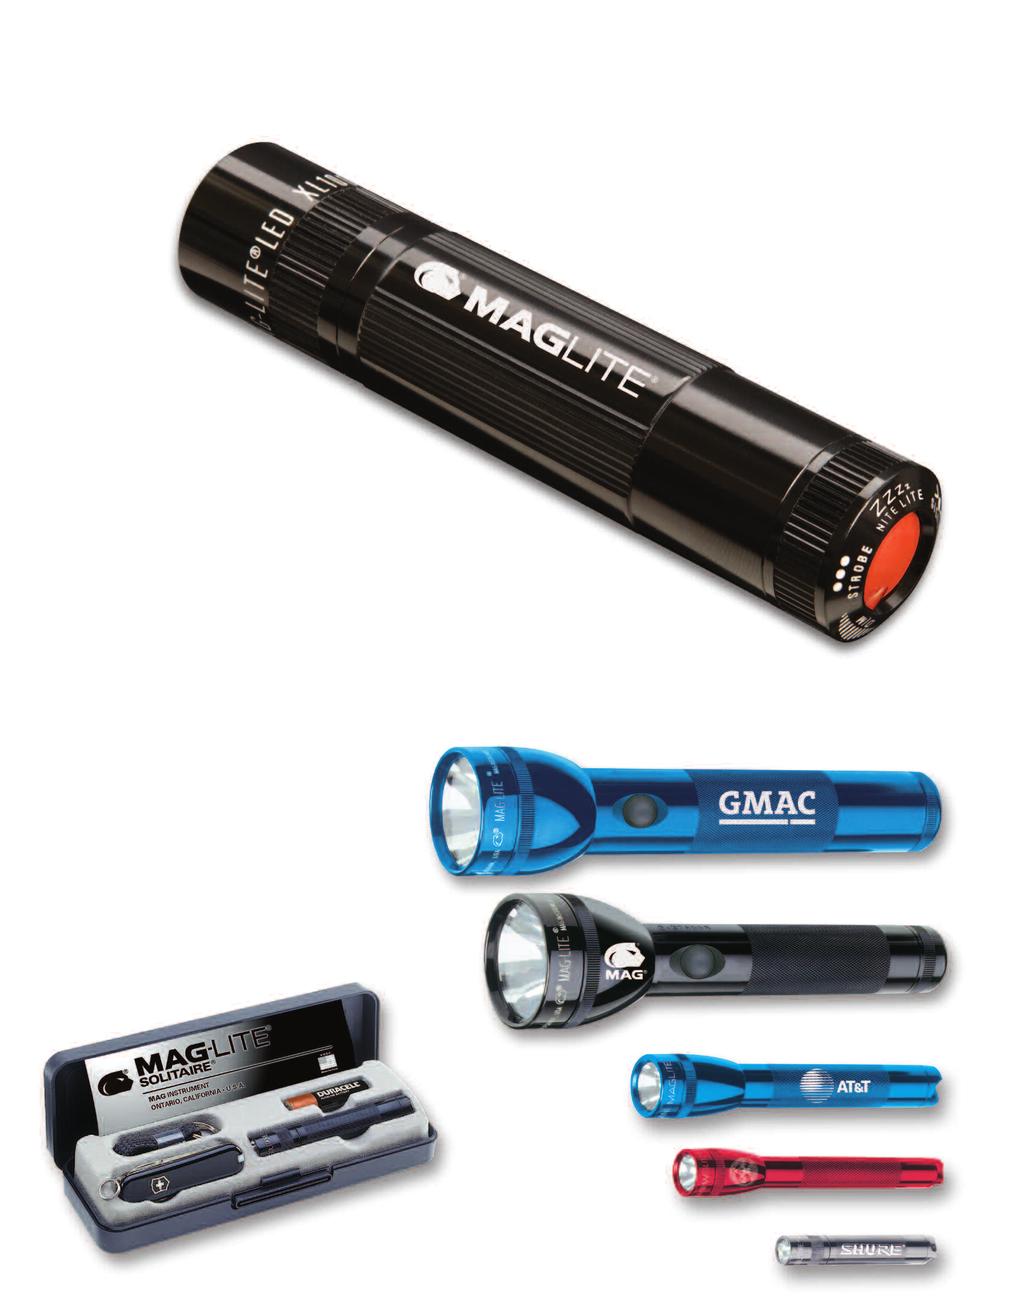 PREMIUMS, INCENTIVES AND CORPORATE GIFTS Mini Maglite AA-Cell flashlight in presentation box with barrel engraving All presentation box exteriors have textured surfaces with silver hot foil stamping